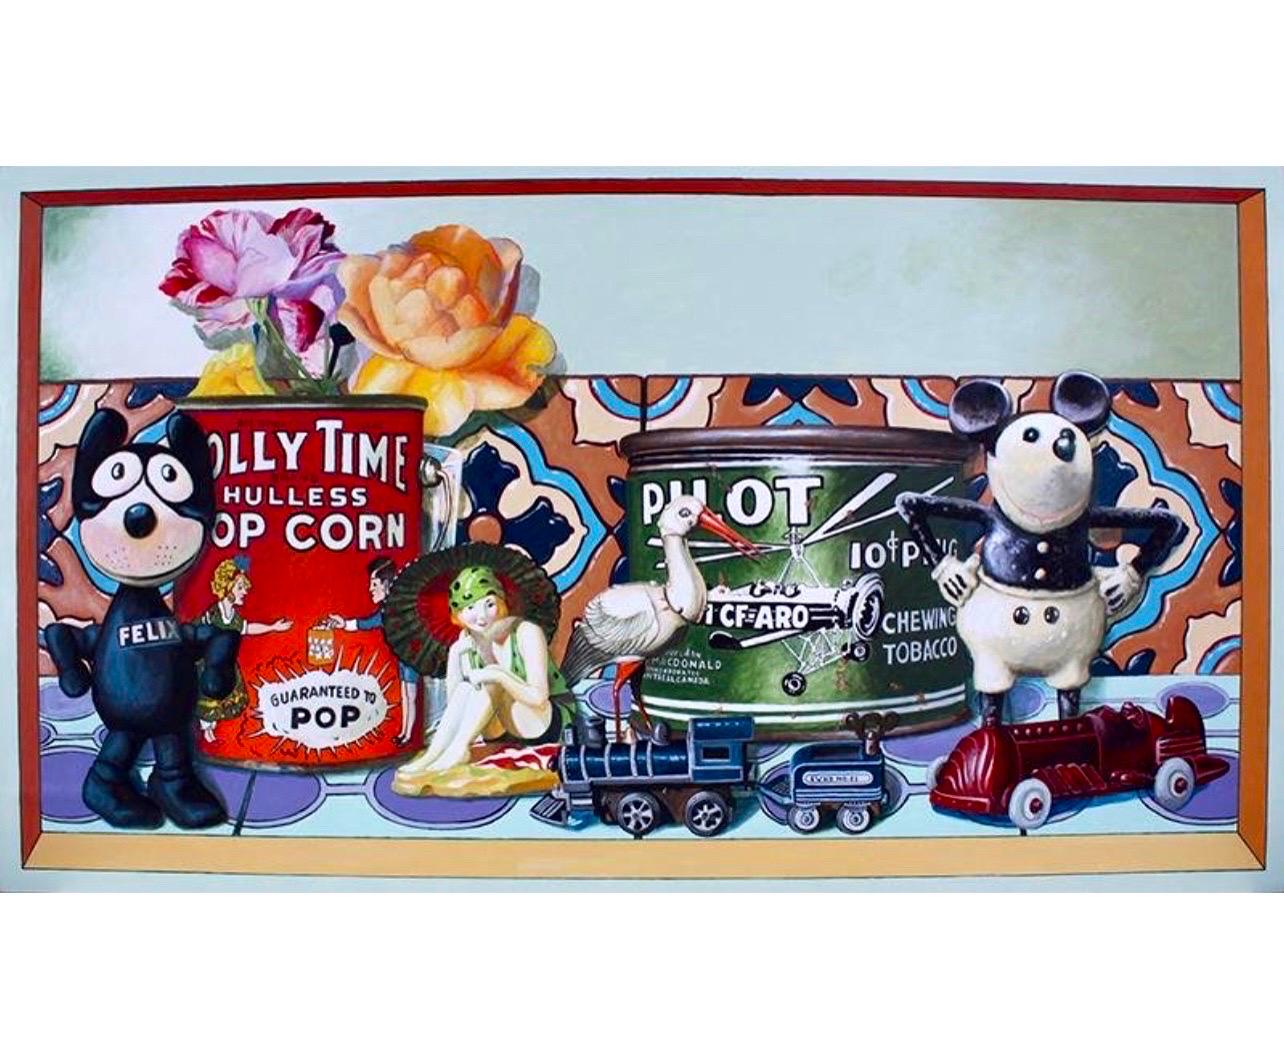 ARTIFACTS, 2015, 
Acrylic painting on paper artist mounted to panel, 
Hand signed and dated right side
Dimensions:  24 x 43 x 1 ¾”
This depicts an old cast iron Mickey Mouse, Felix the Cat, an old tin can of pop corn and other vintage, nostalgic,